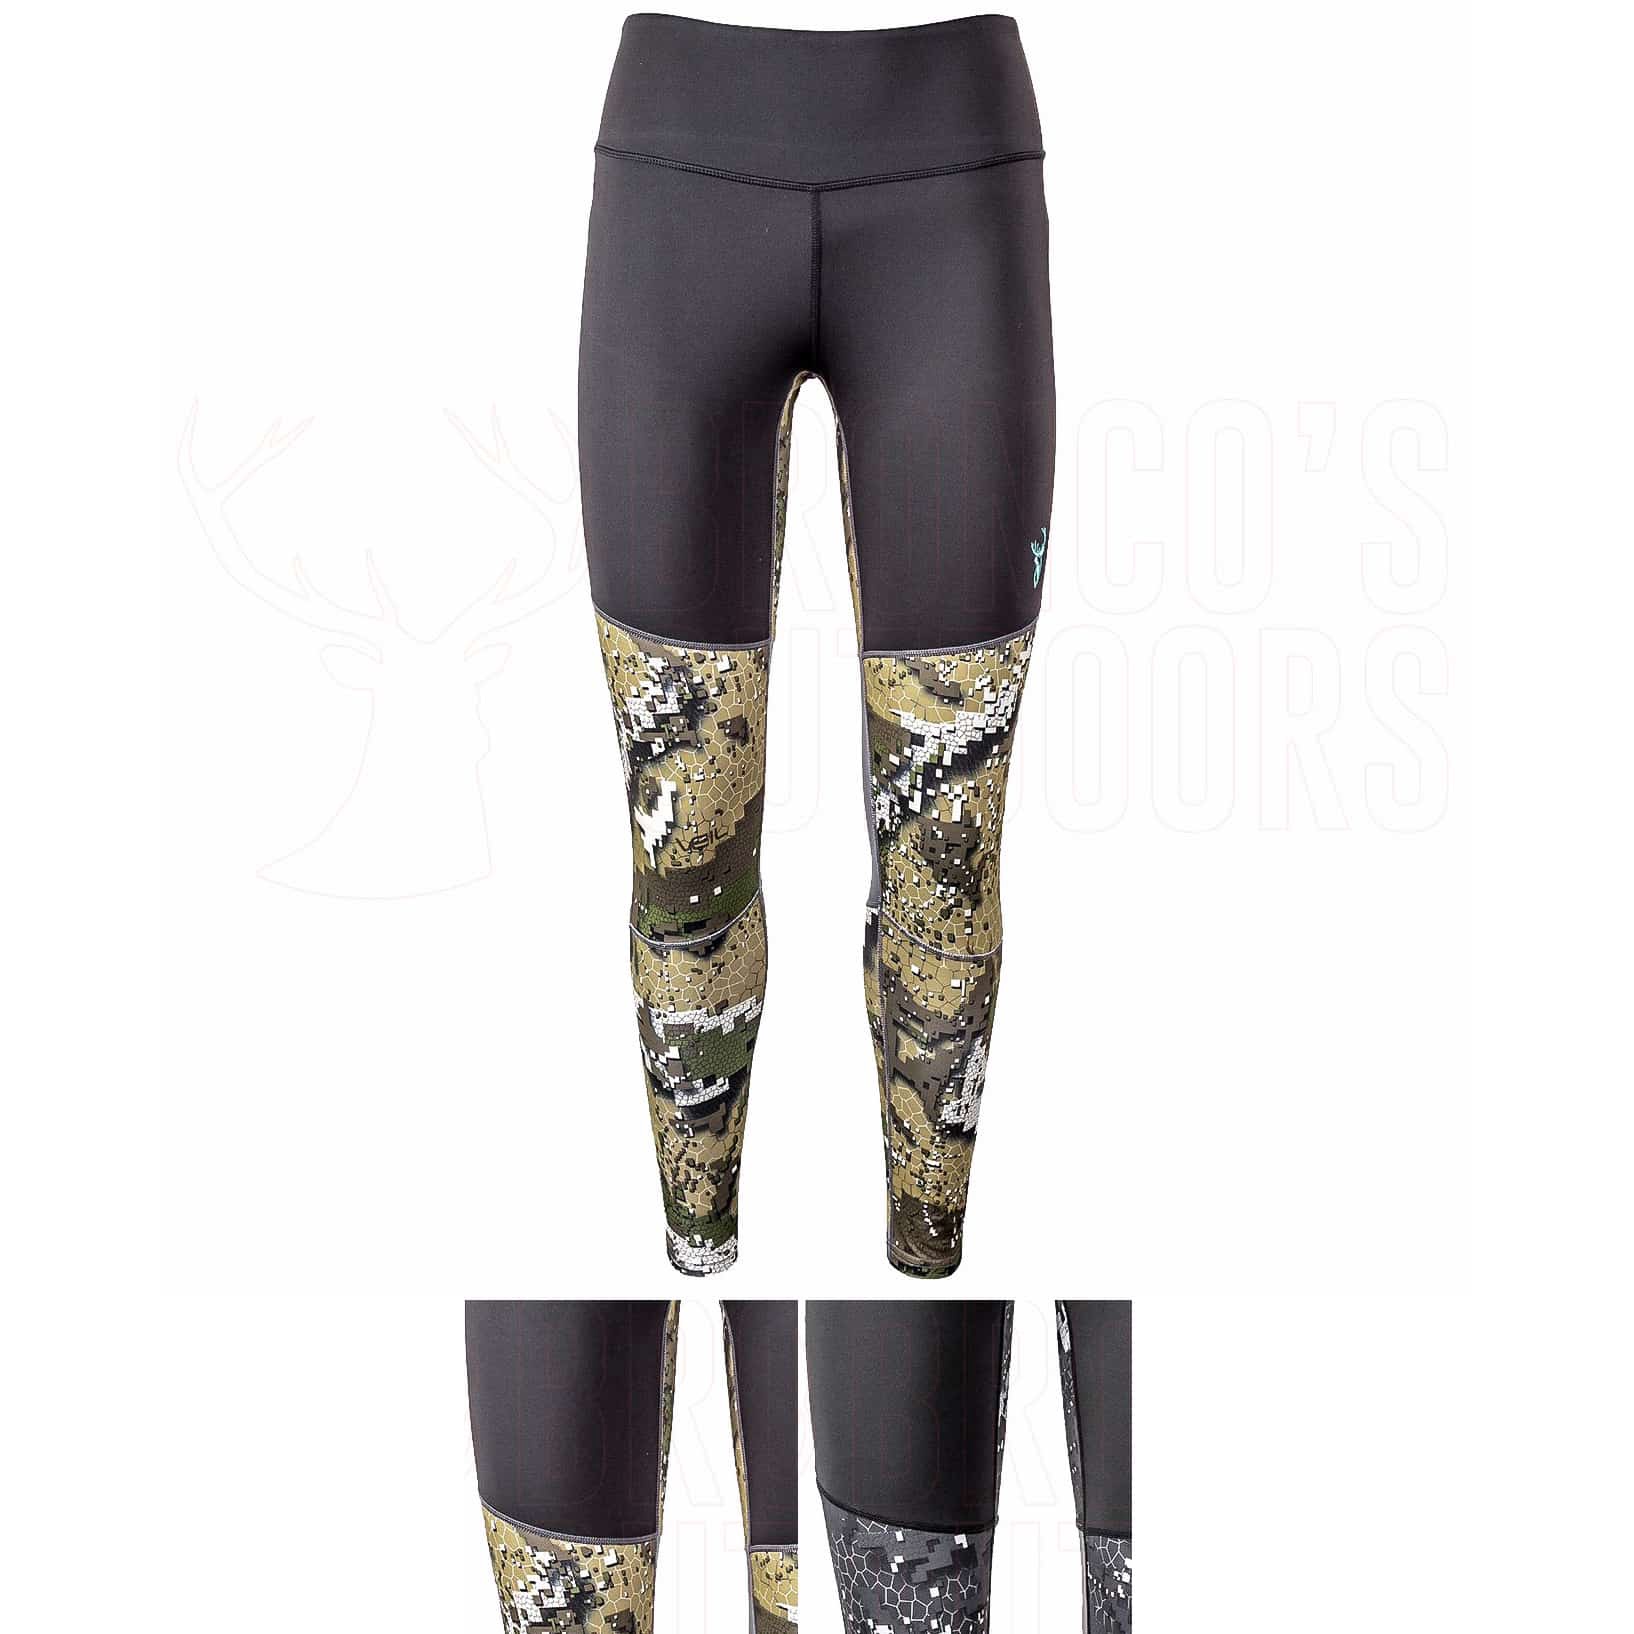 Hunters Element, Core Leggings, 4-Way Stretch Polyester Highly Breathable  Hunting Leggings, Flat-Lock Seams